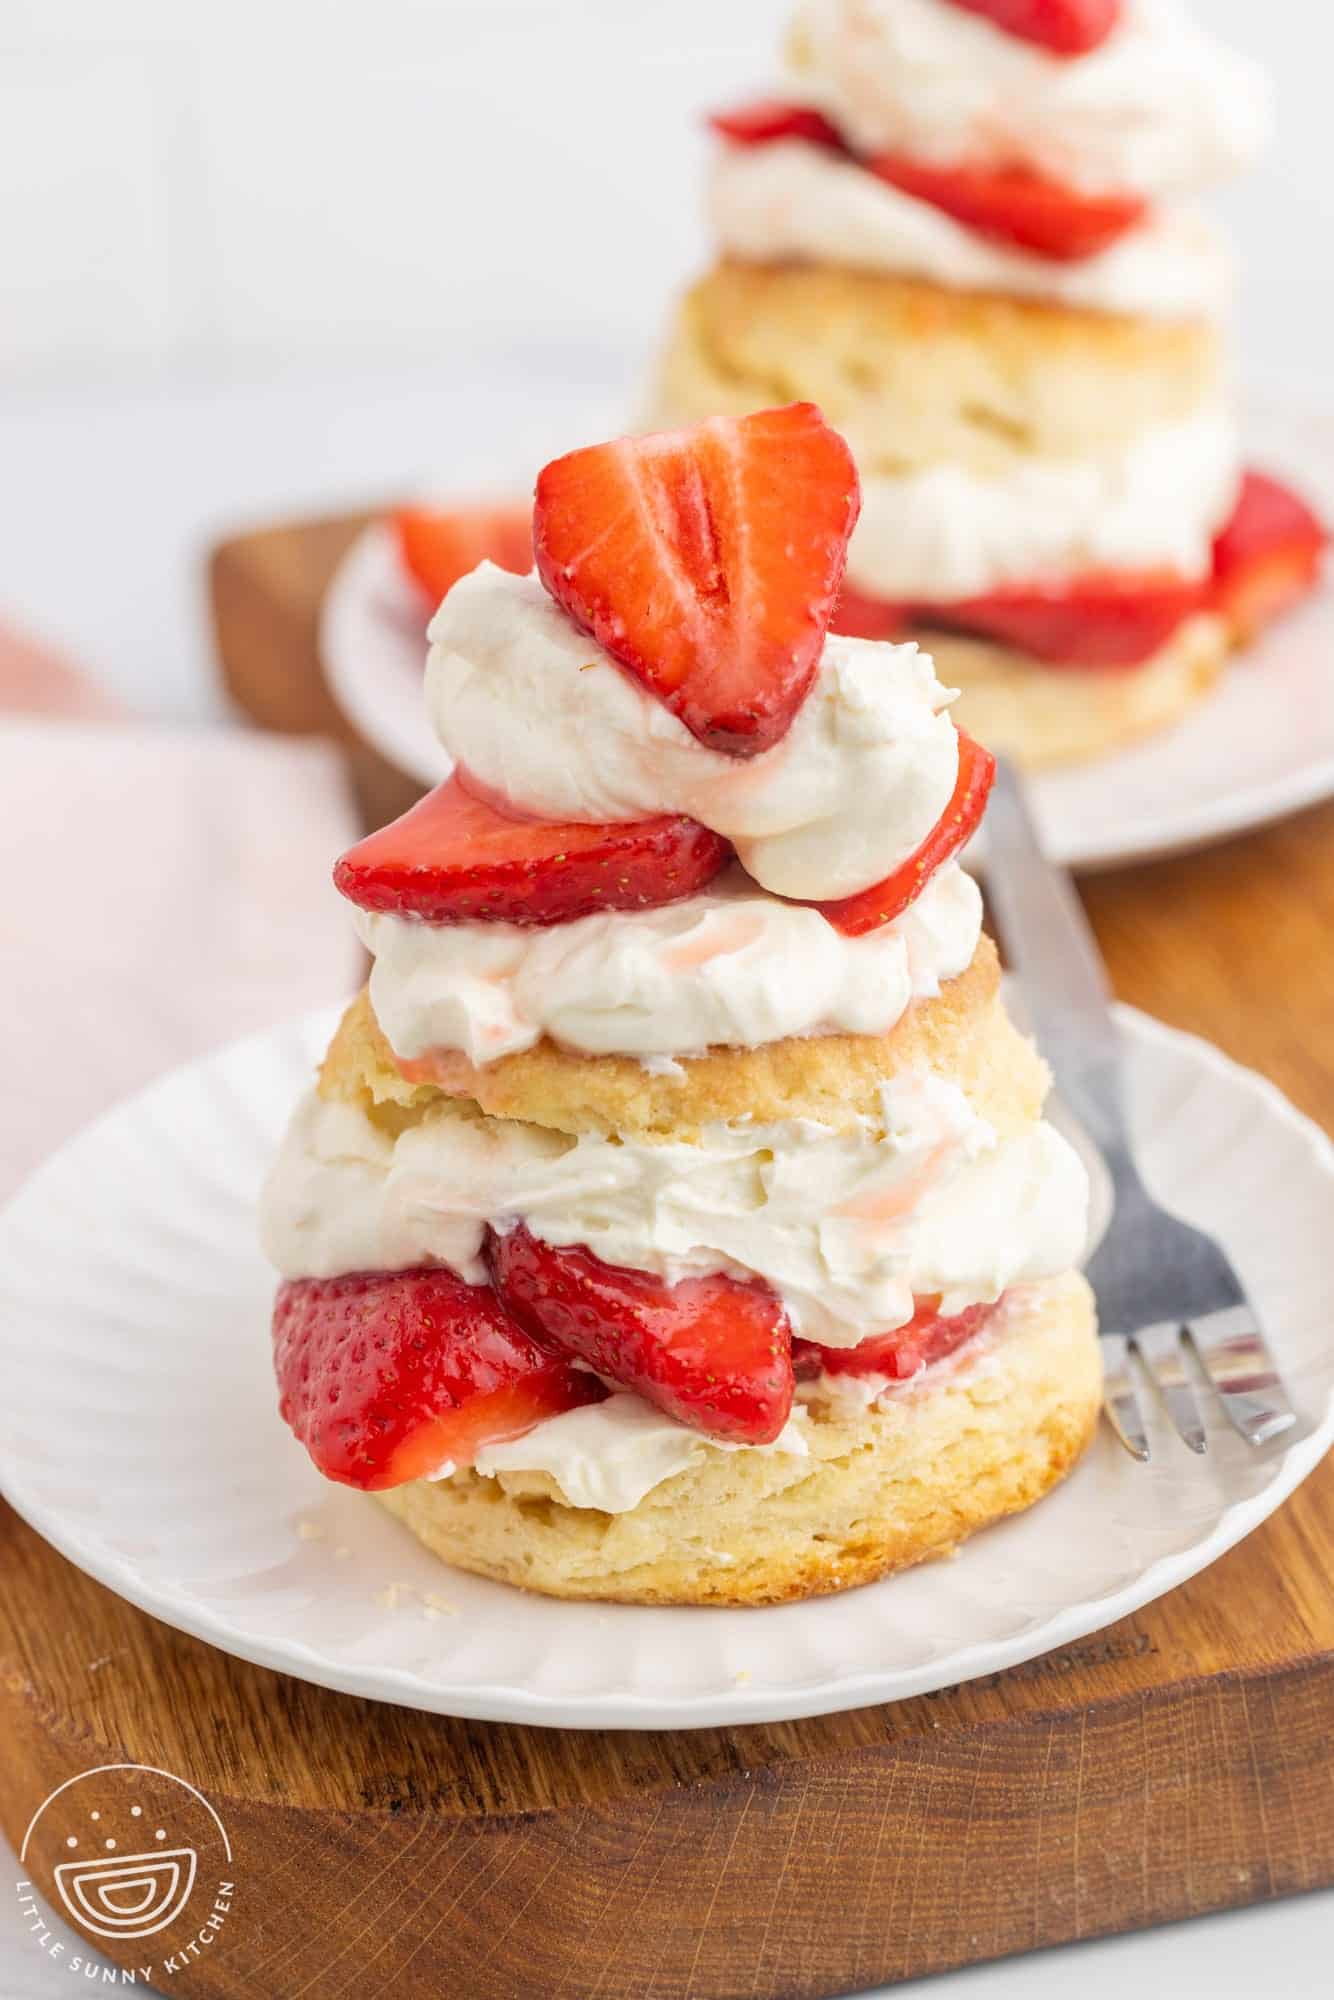 Strawberry shortcake on a small white plate and a fork on the side